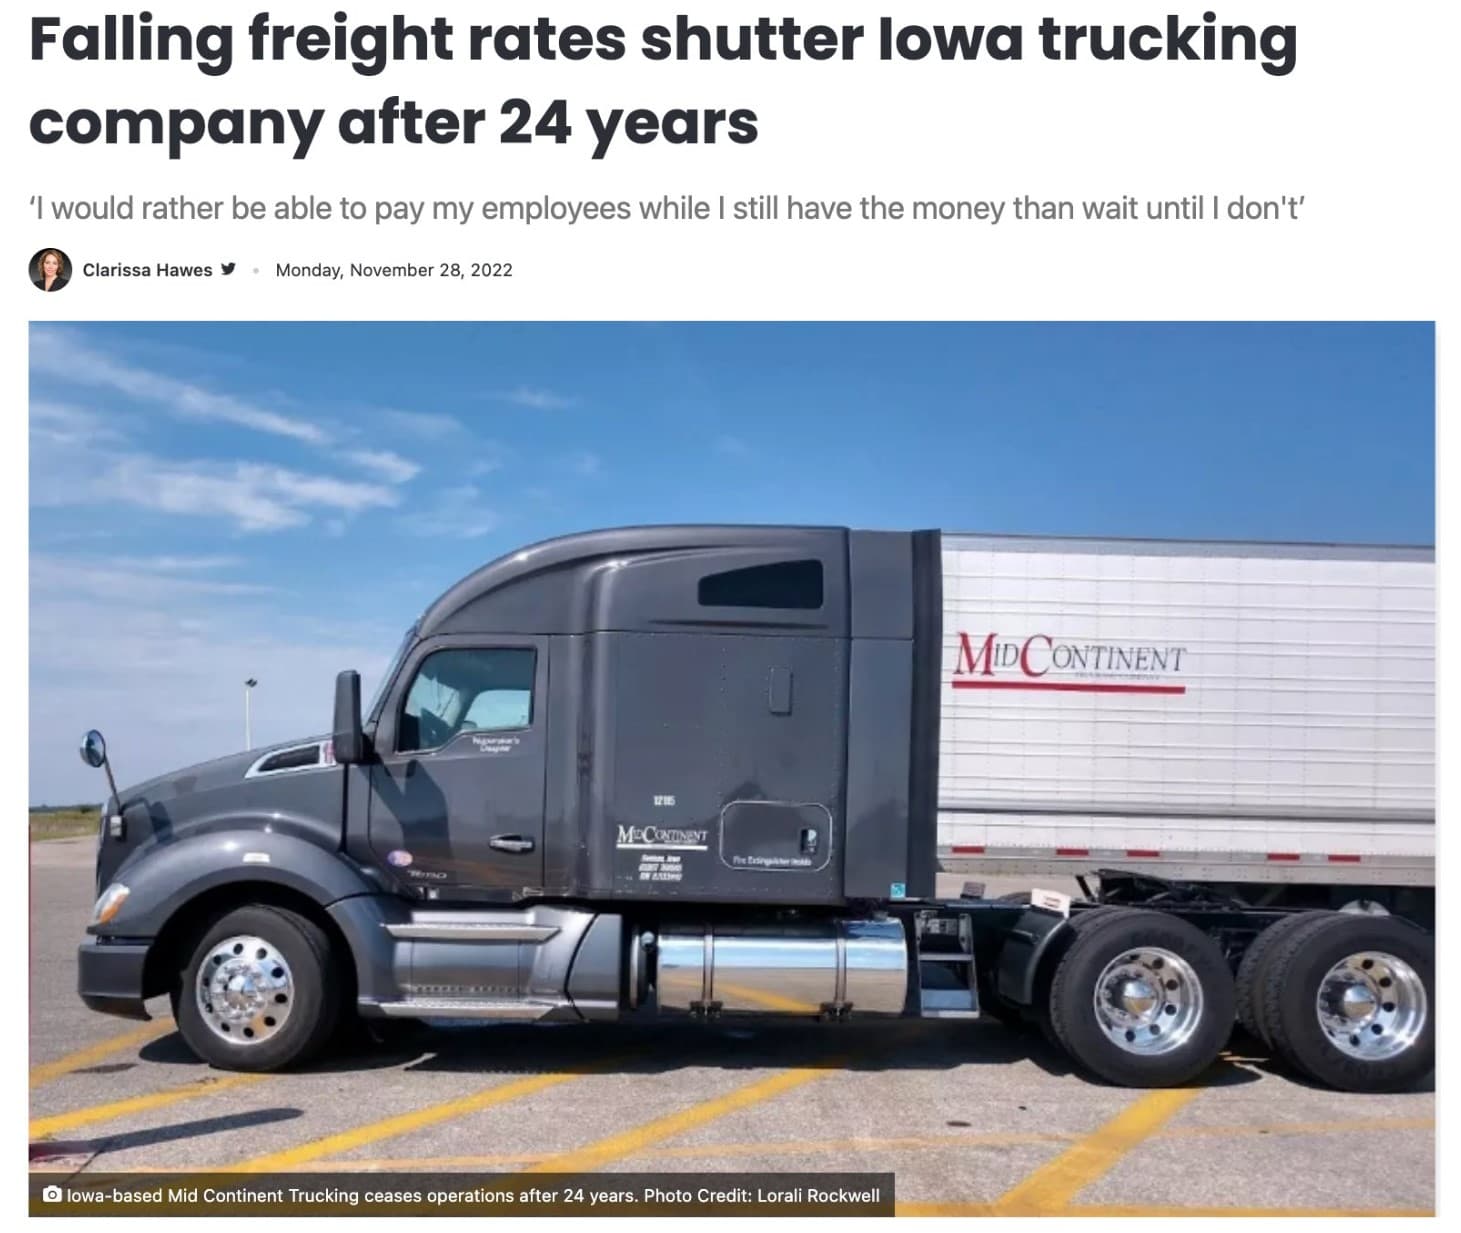 Iowa trucking firm with 25 trucks shutters after 24 years